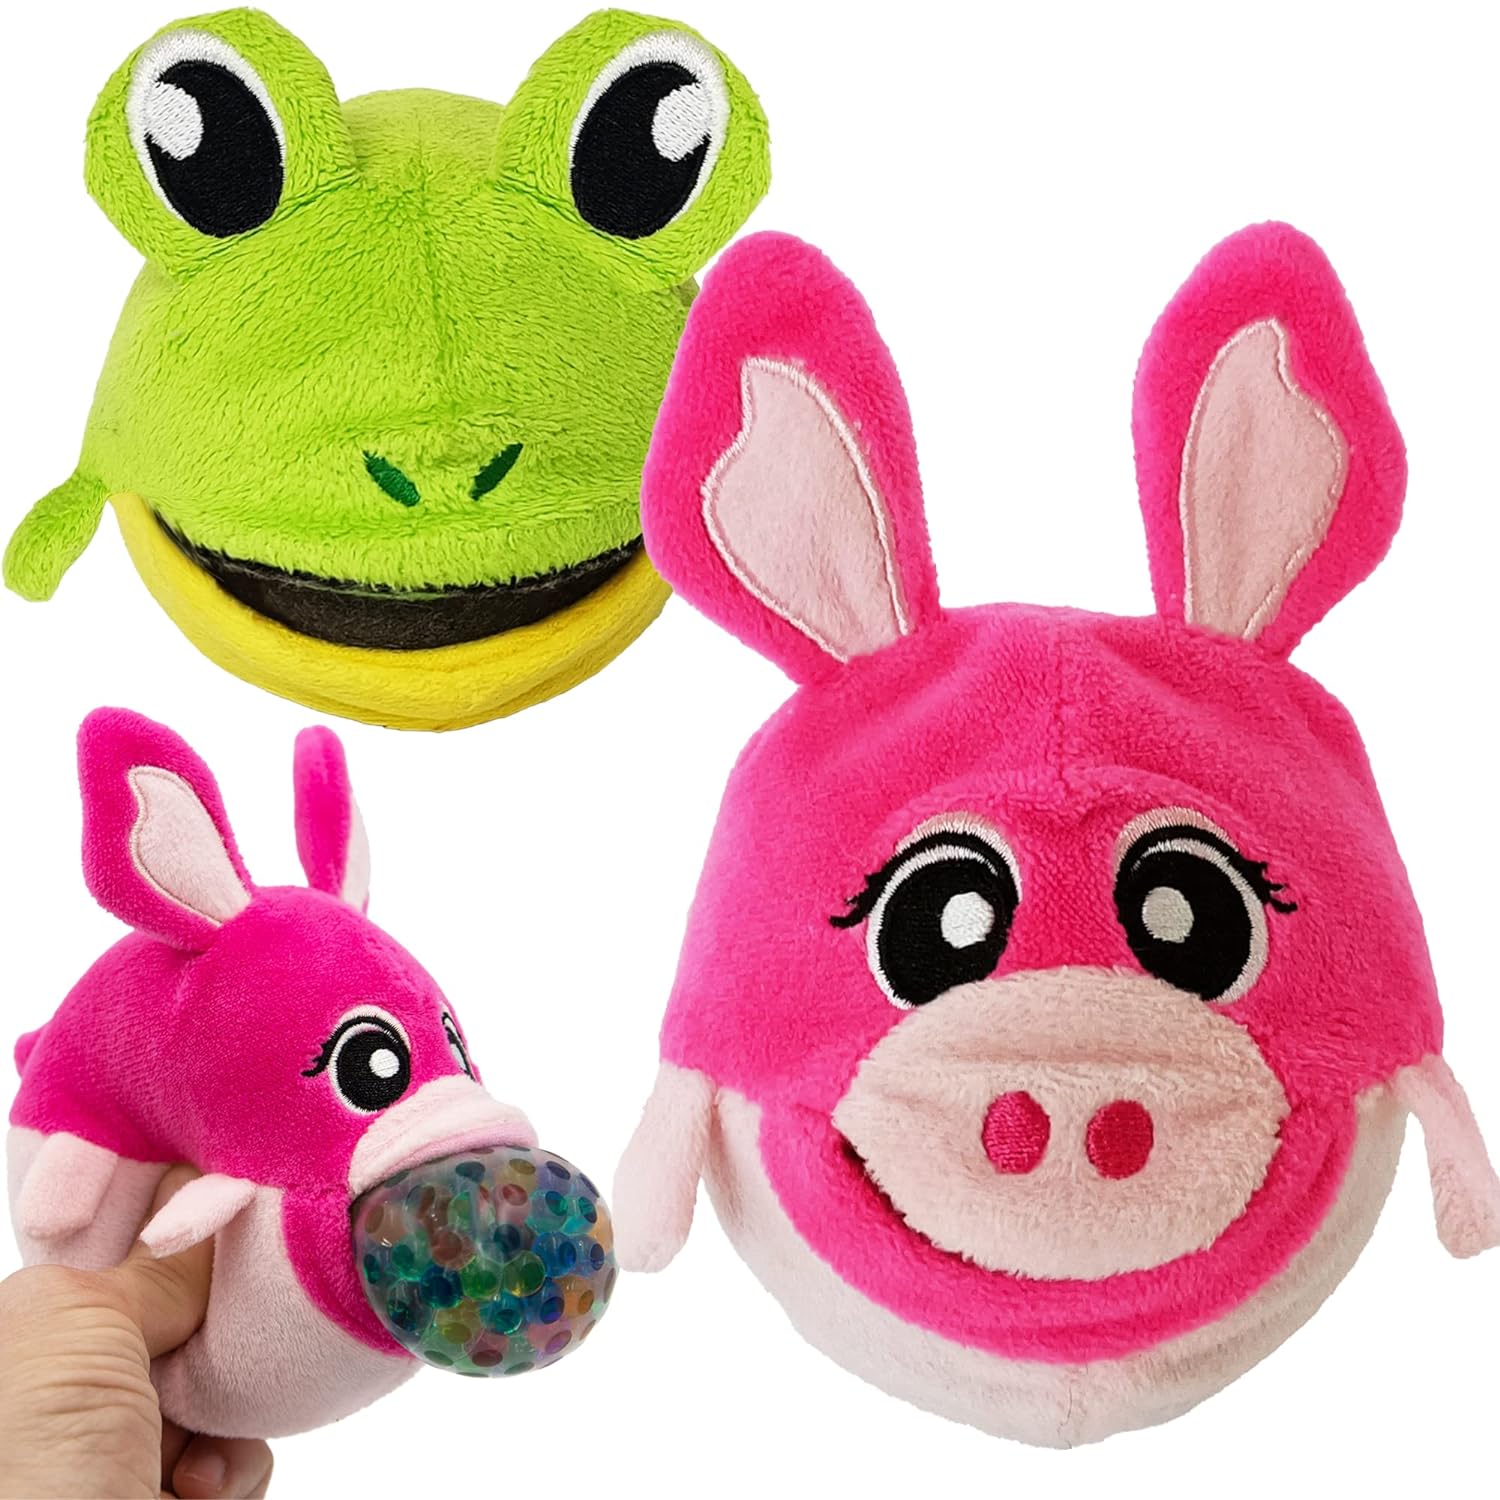 Plush Animal Toy with Squeezy Water Beads, Set of 2